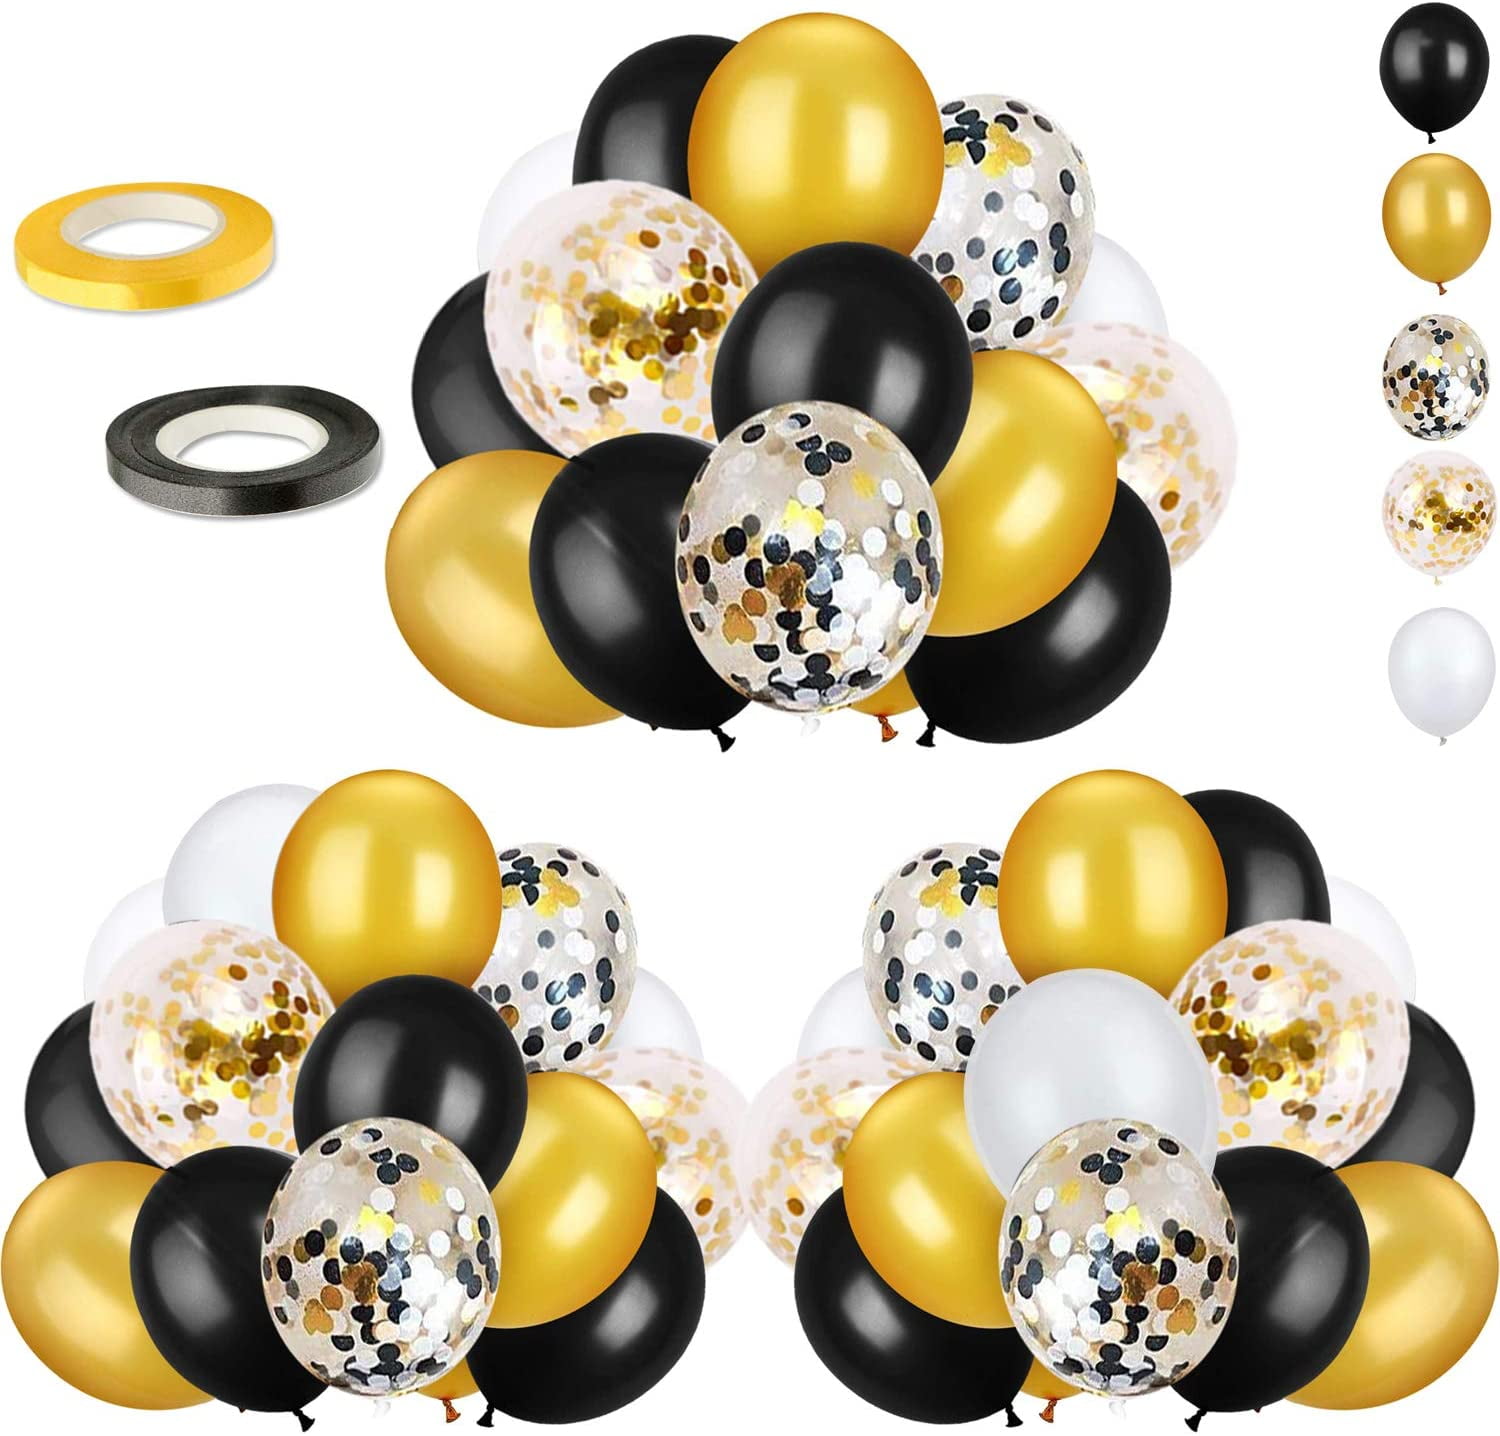 5 Inch SMALL Round Plain Latex black Party Balloons Black baloons Hellowin Party 